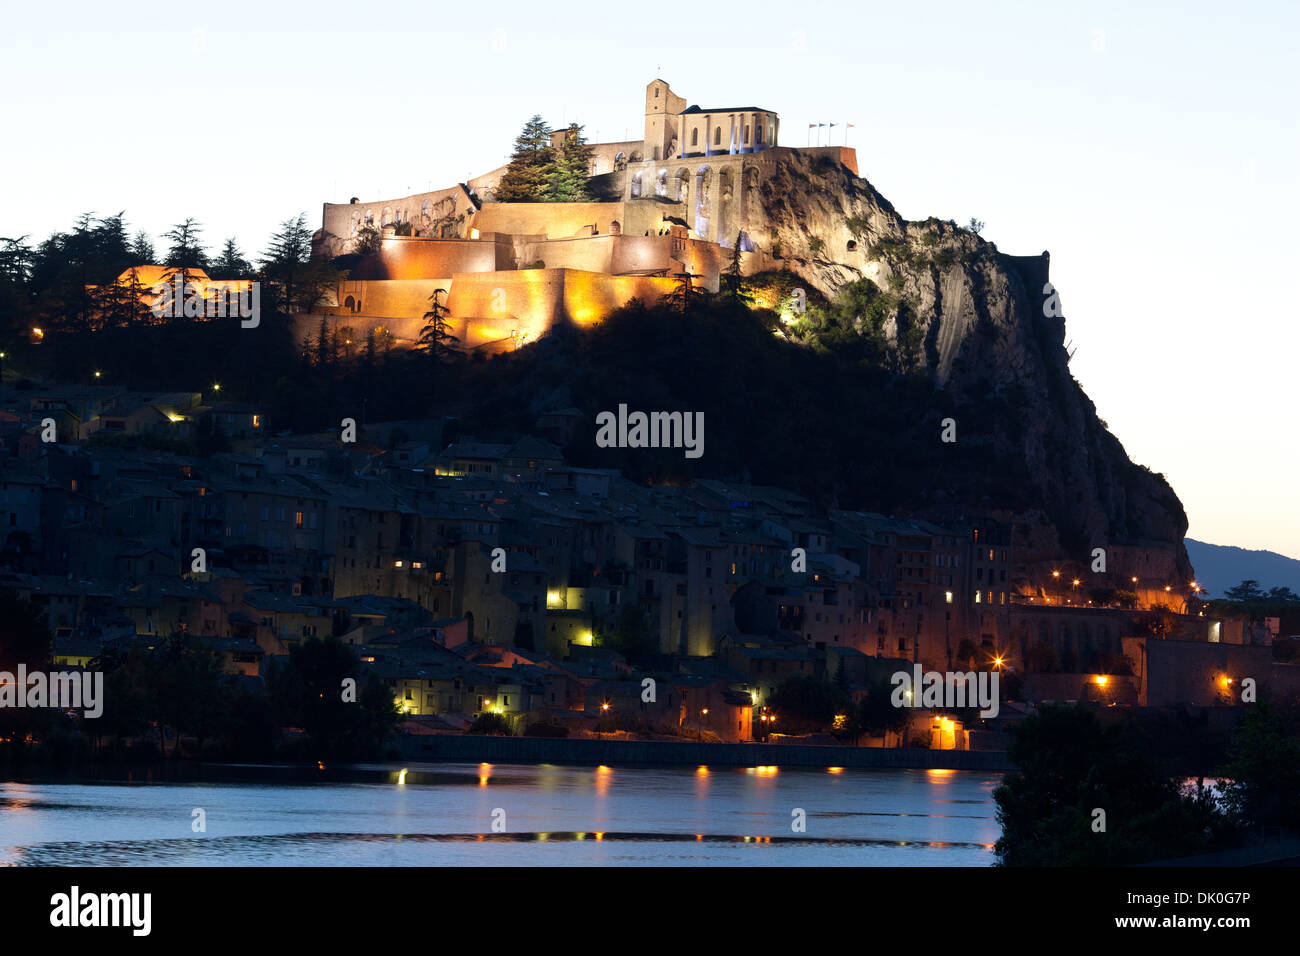 Citadel of Sisteron at dusk overlooking the Old Town and the Durance River. Alpes-de-Haute-Provence, Provence, France. Stock Photo